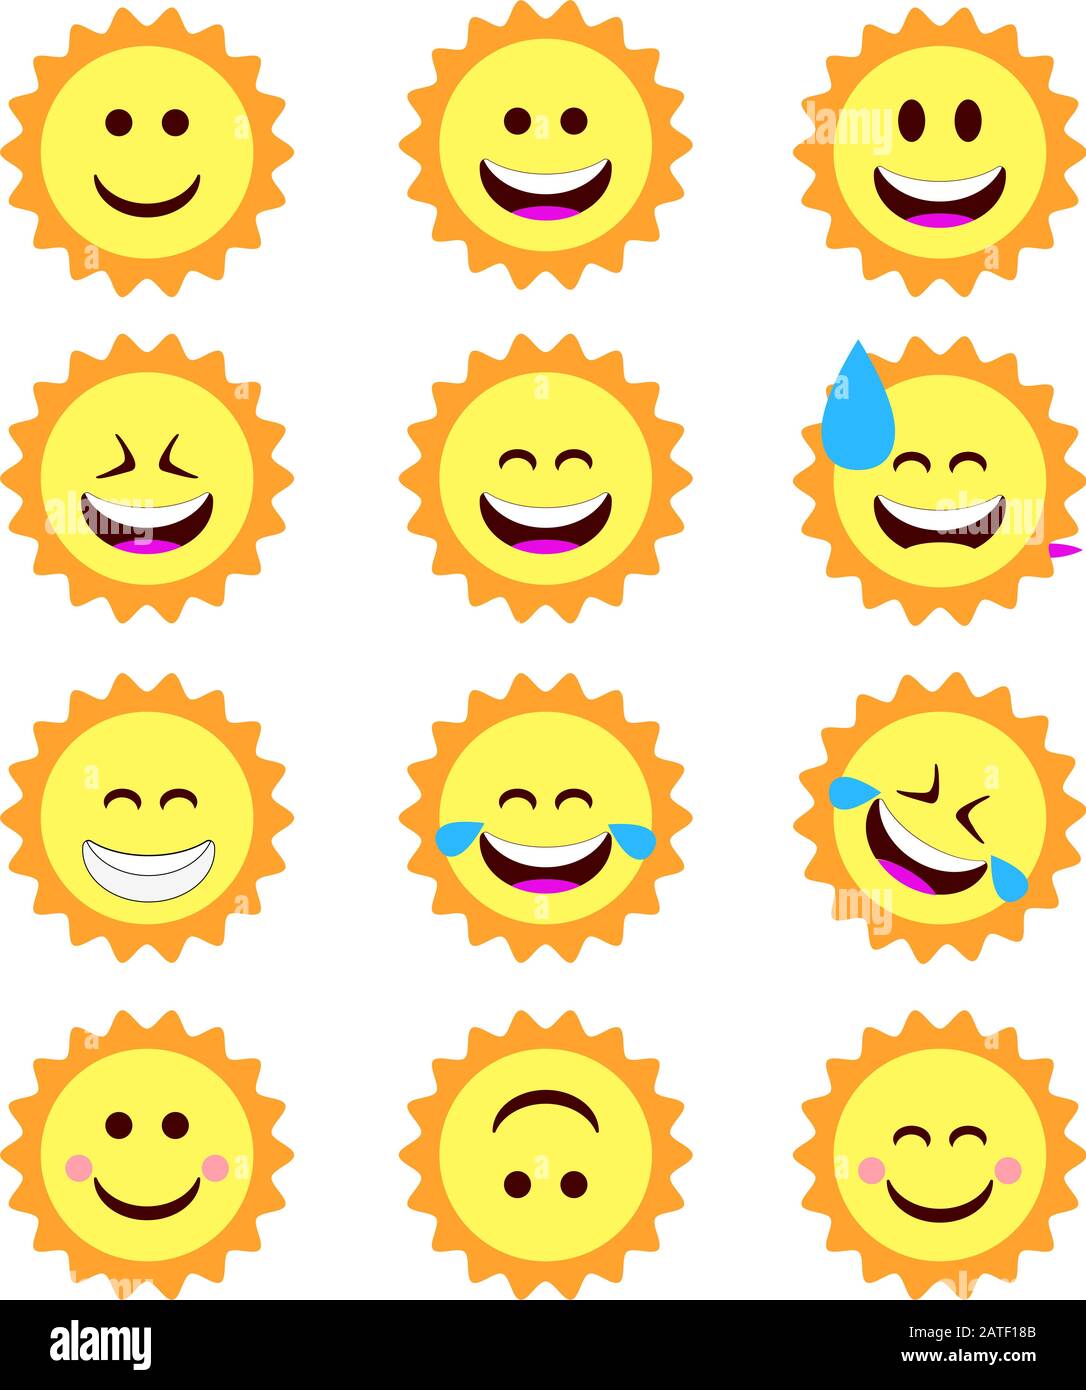 Smiling sun icons to use in chat or designs Stock Photo